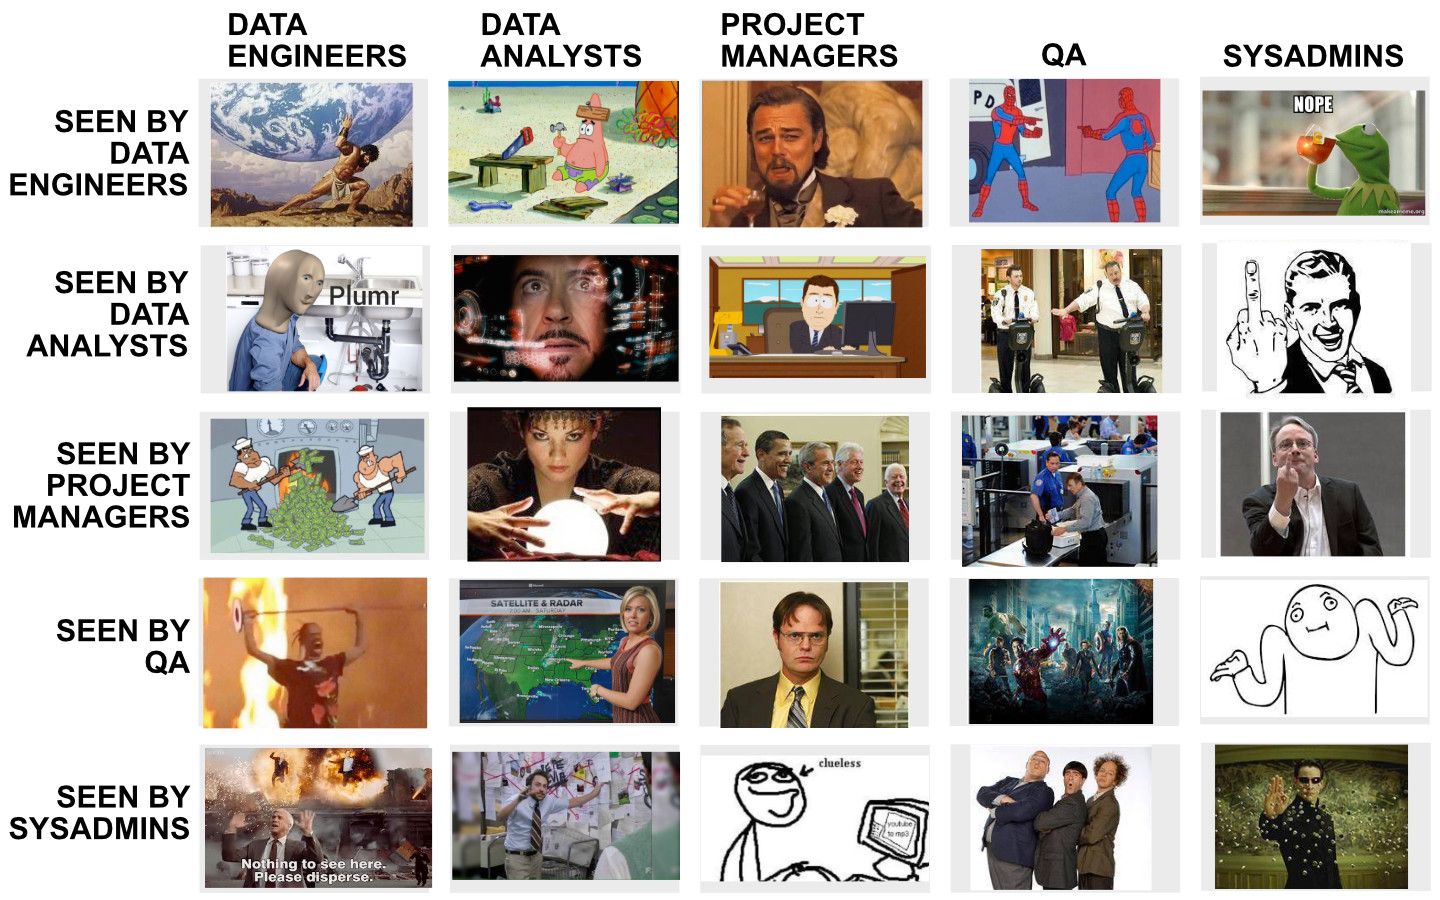 How people who work in data see each other